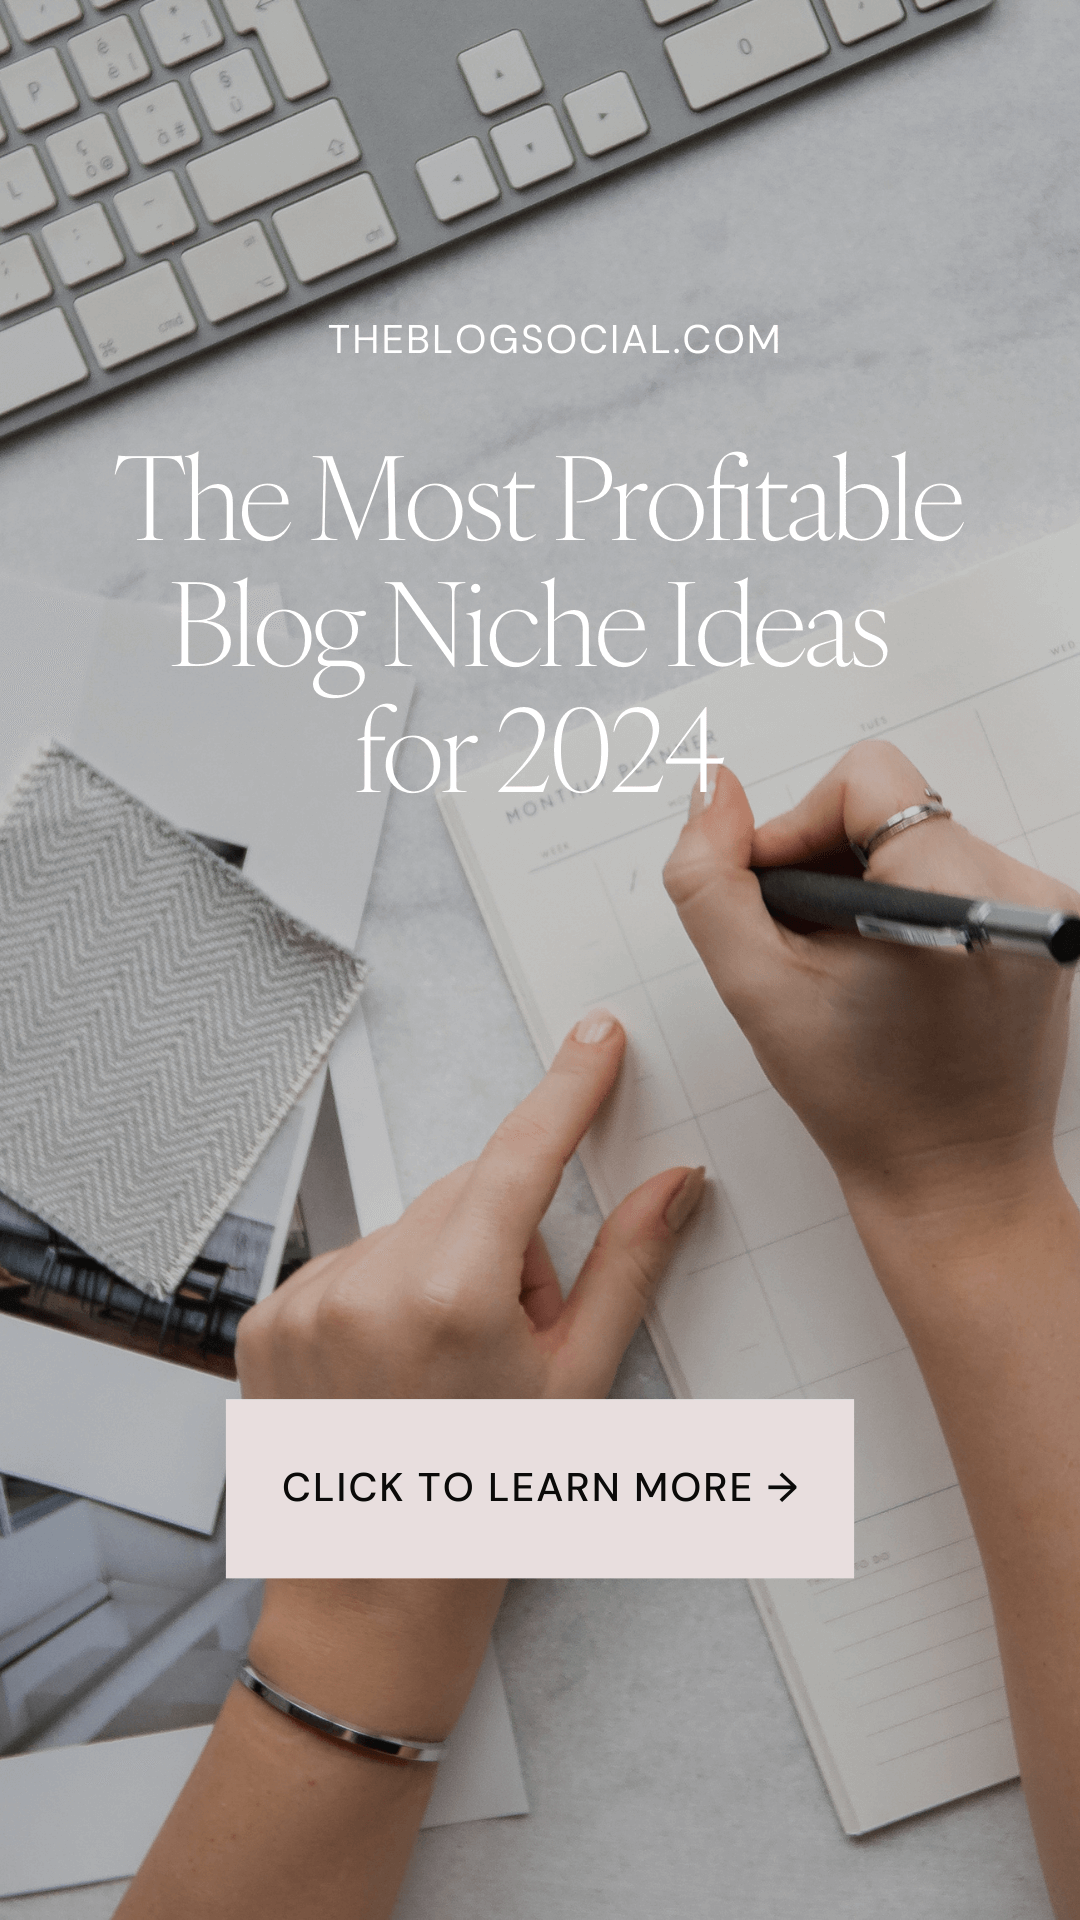 120 Most Profitable Blog Niche Ideas to Write About